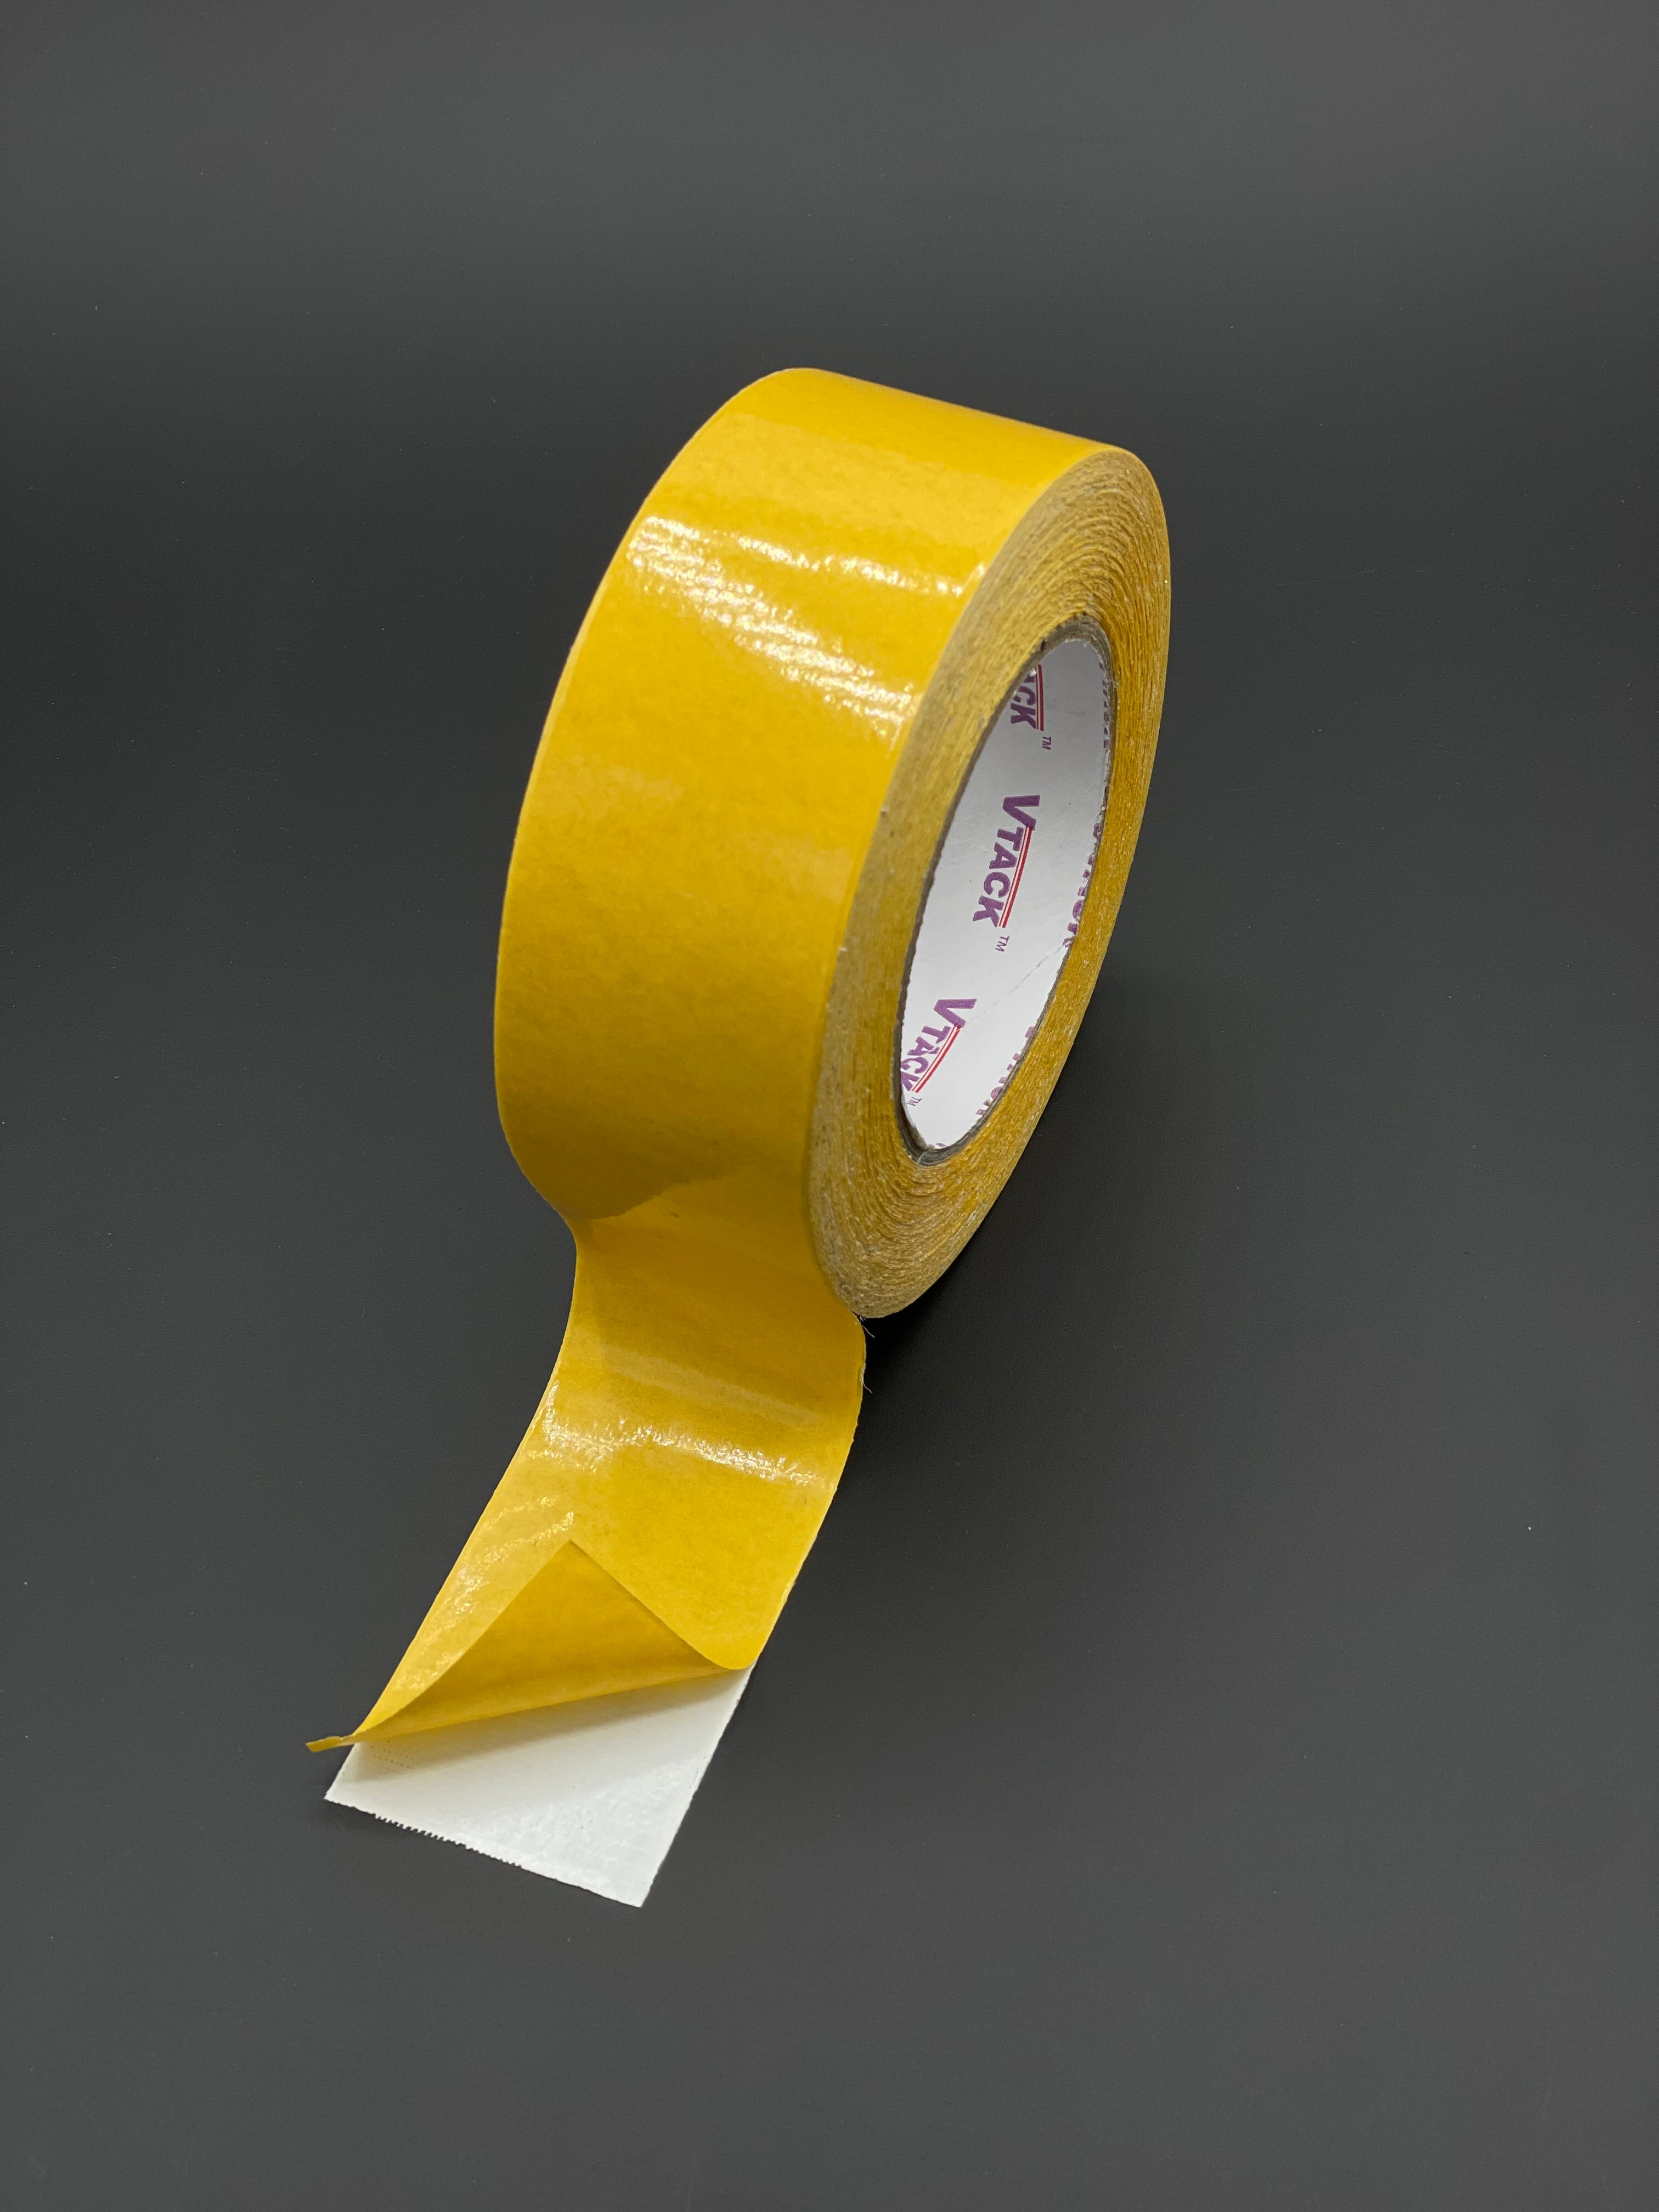 VTACK Double Sided Cloth Tape